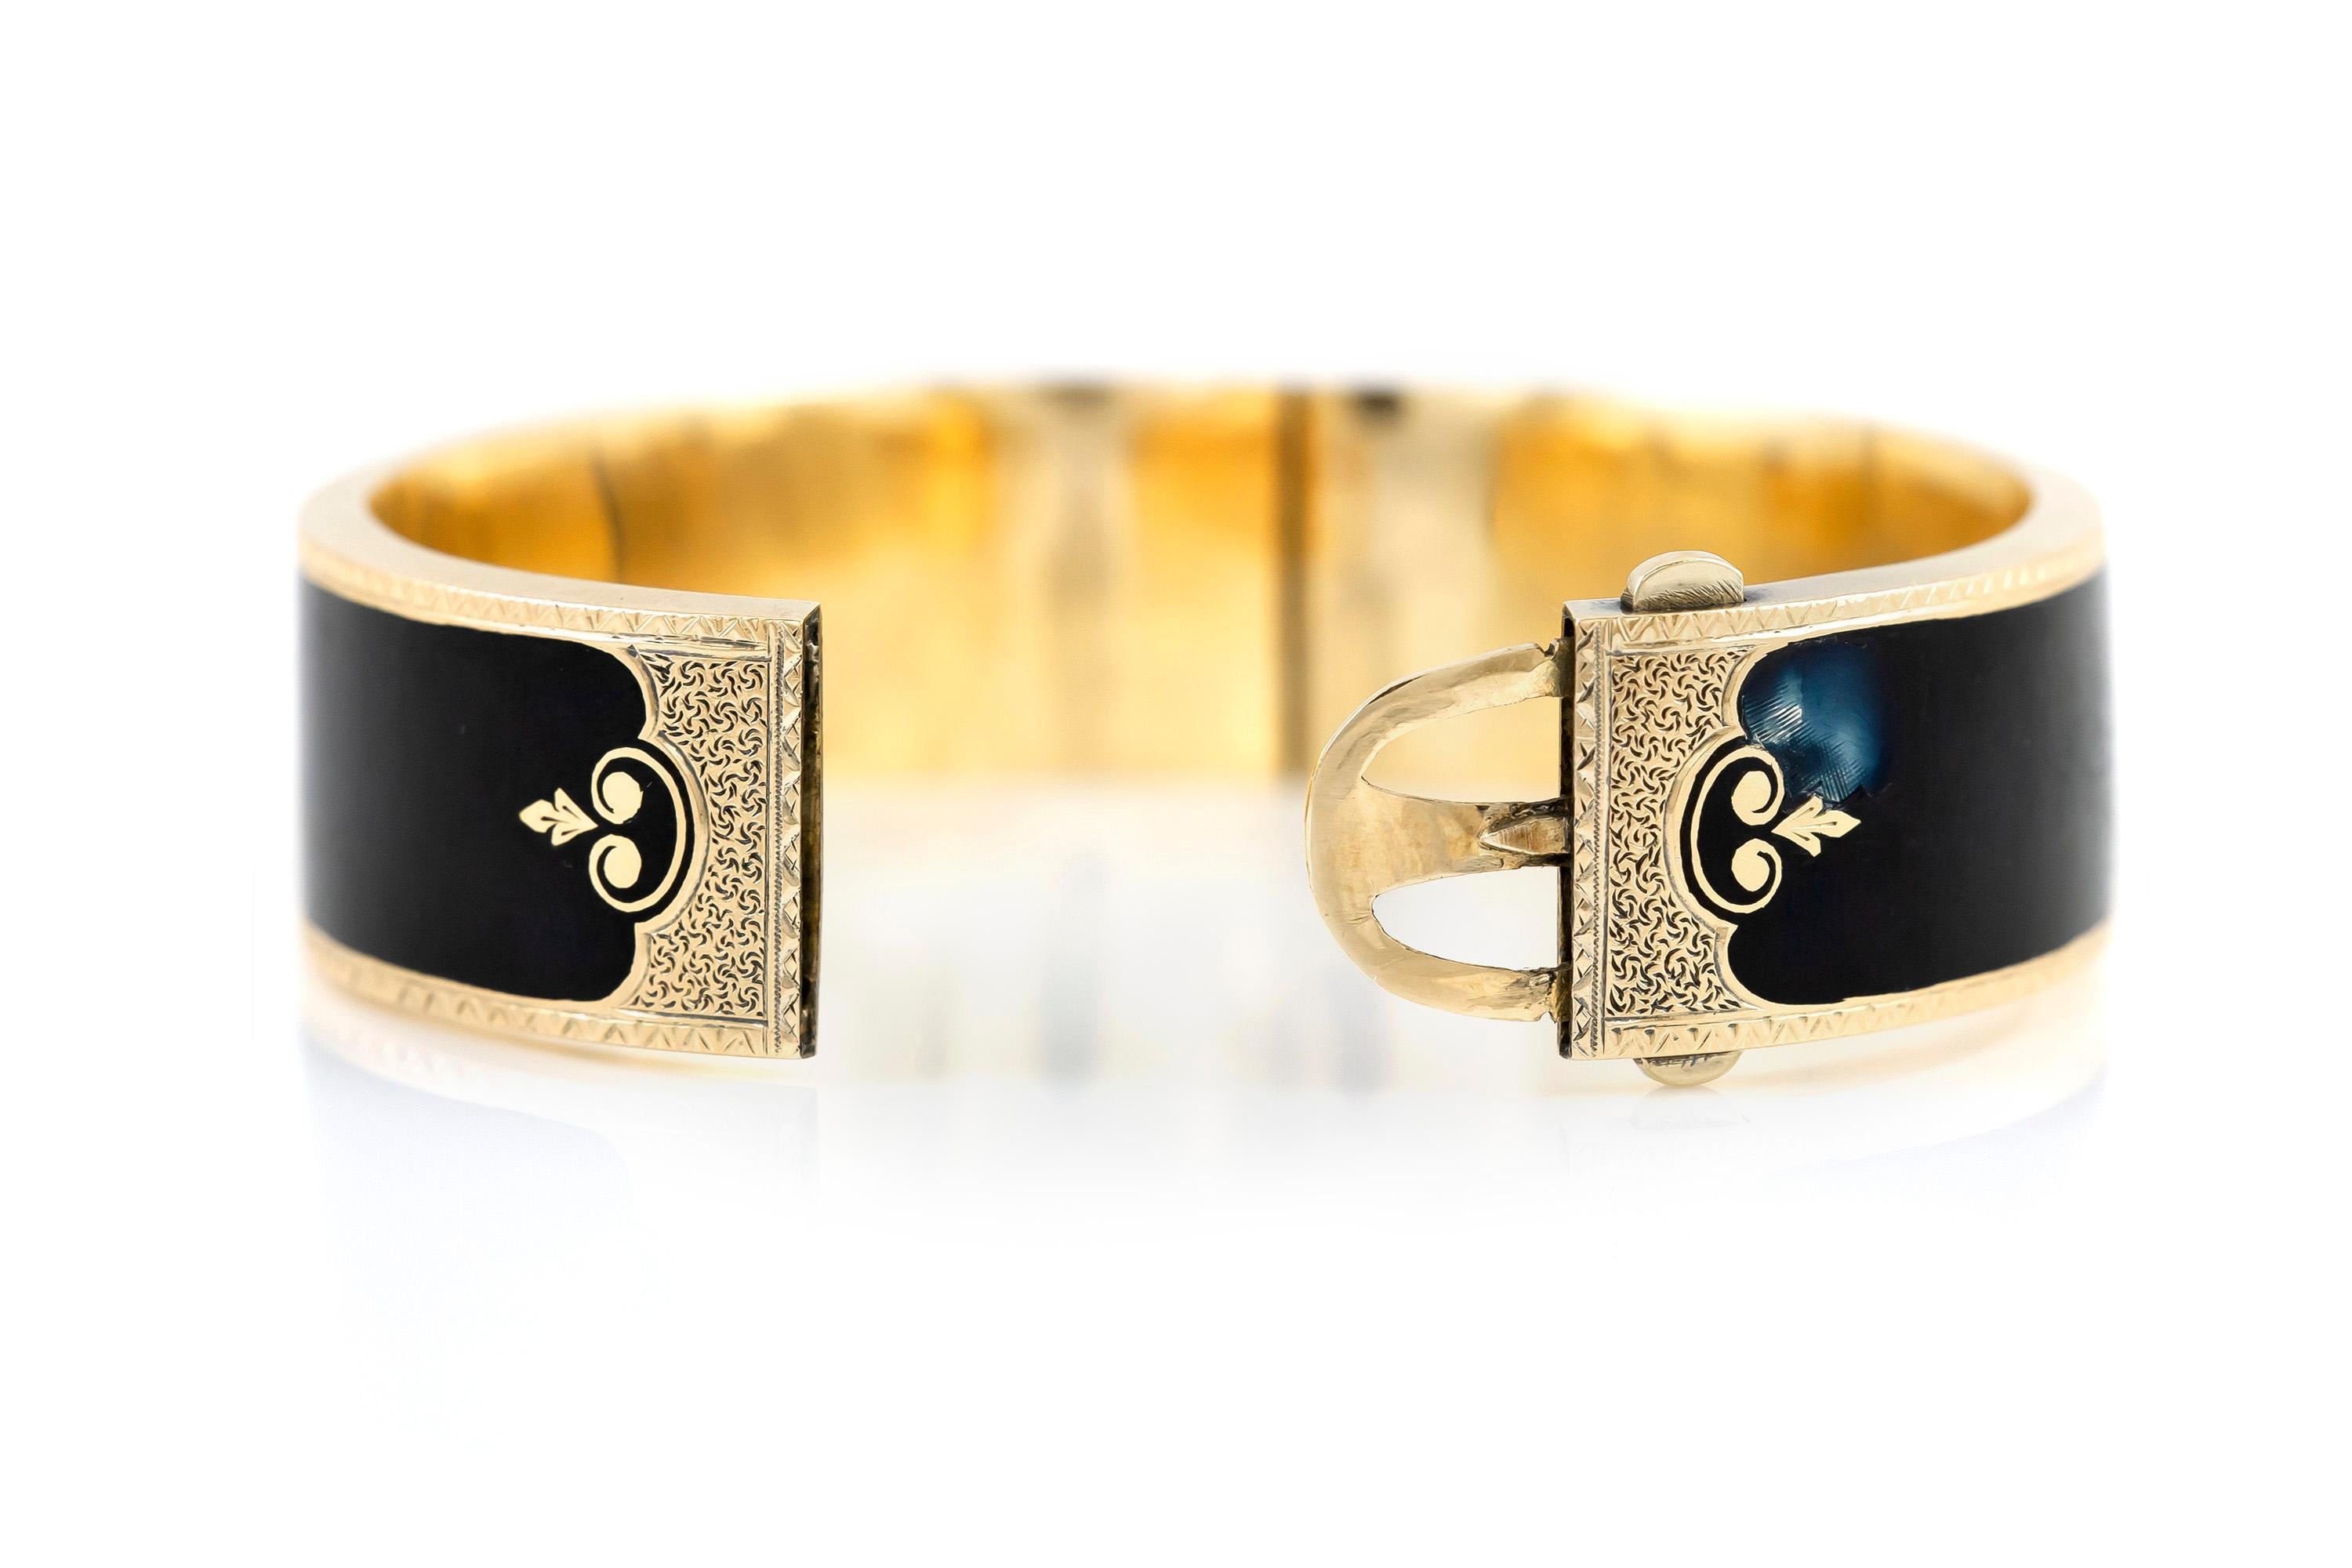 The bangels are finely crafted in 18k yellow gold and cover by black enamel with few pearls in front of the bracelet.

(The price is for the two )